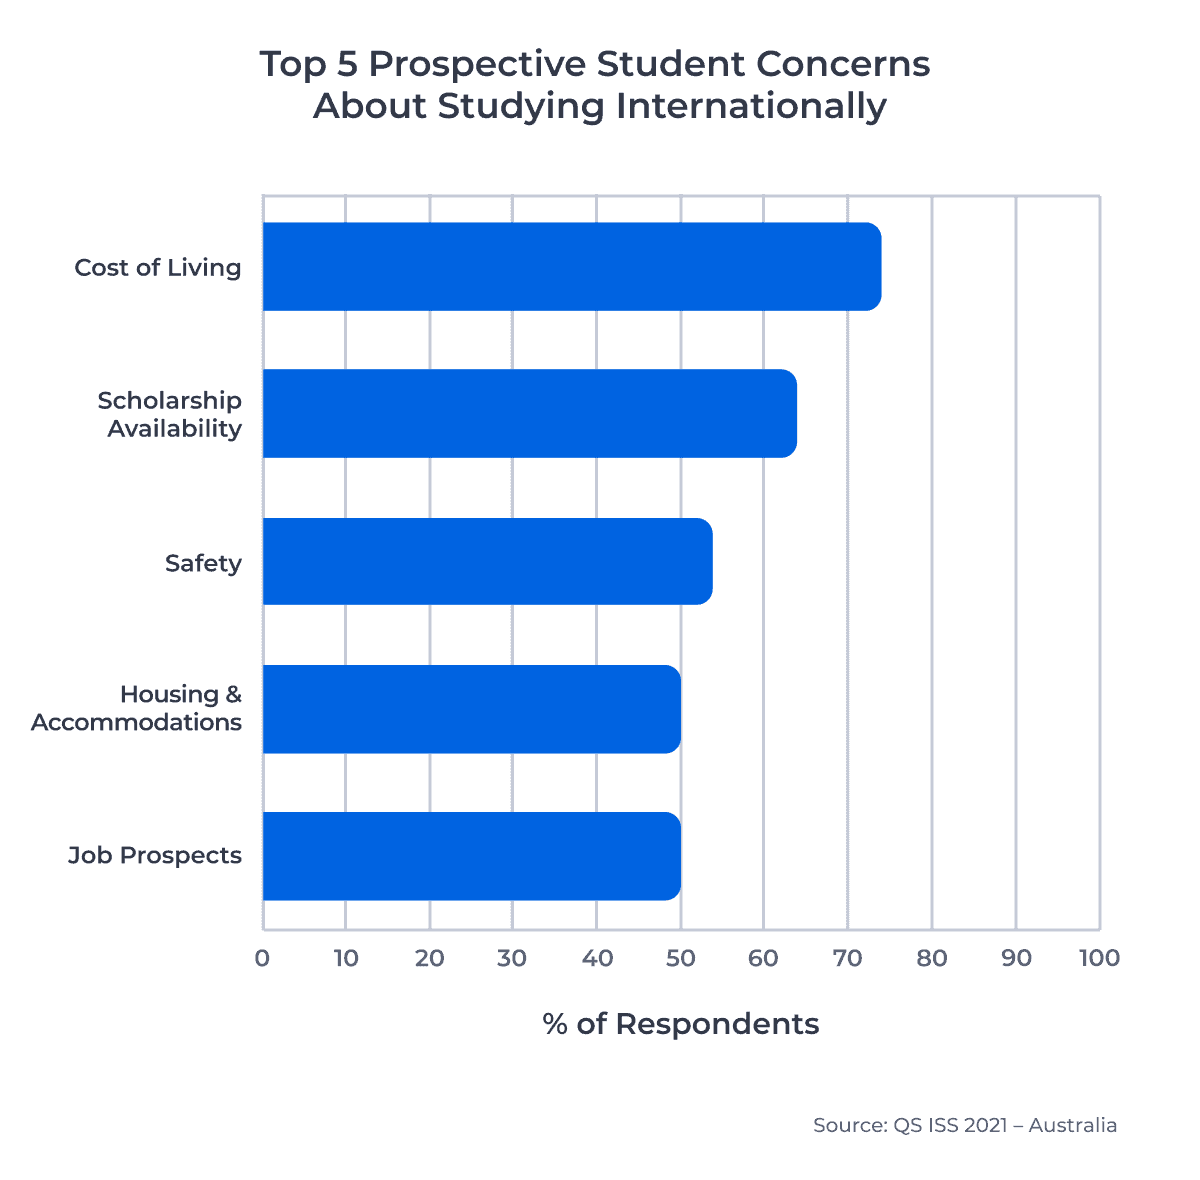 Top 5 Prospective Student Concerns about Studying Internationally